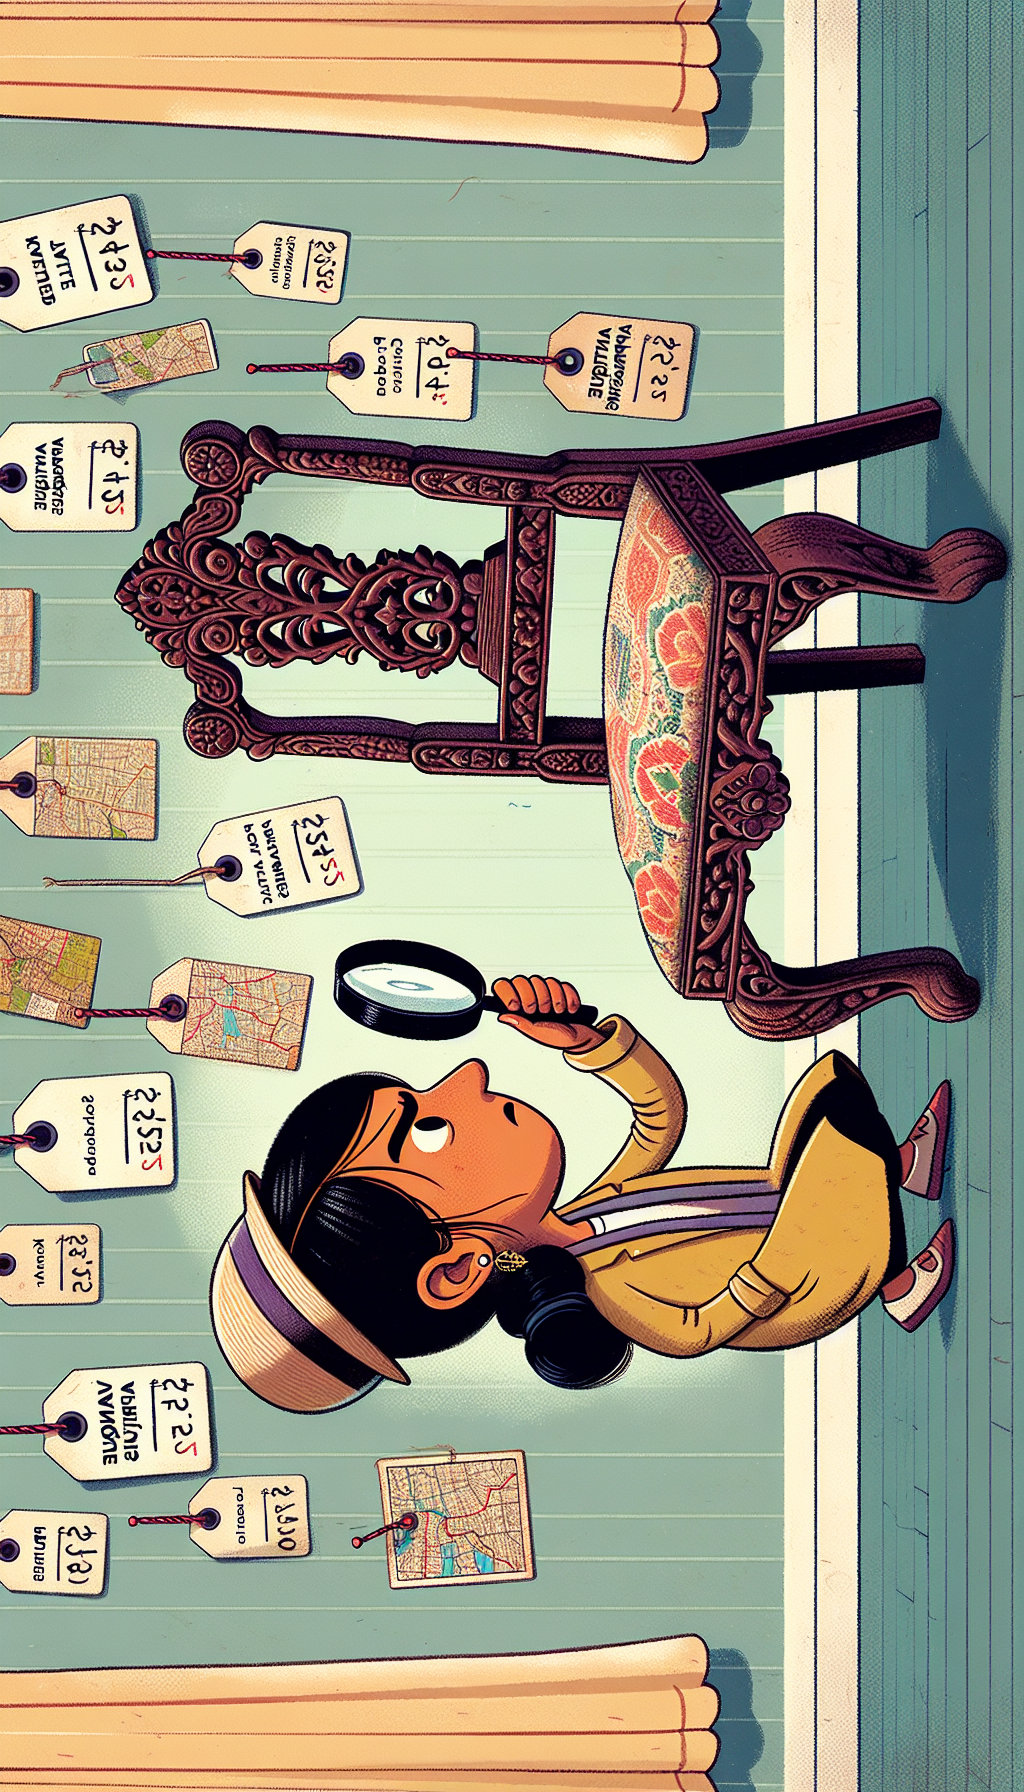 A whimsical caricature of a magnifying glass-wielding detective, peering intently at an elaborately carved antique chair with price tags doubling as speech bubbles listing valuation tips, stands in a room wallpapered with worn maps and pushpins marking local "Antique Appraisals". The playful mix of flat and 3D styles adds depth and emphasizes the hunt for nearby expertise.